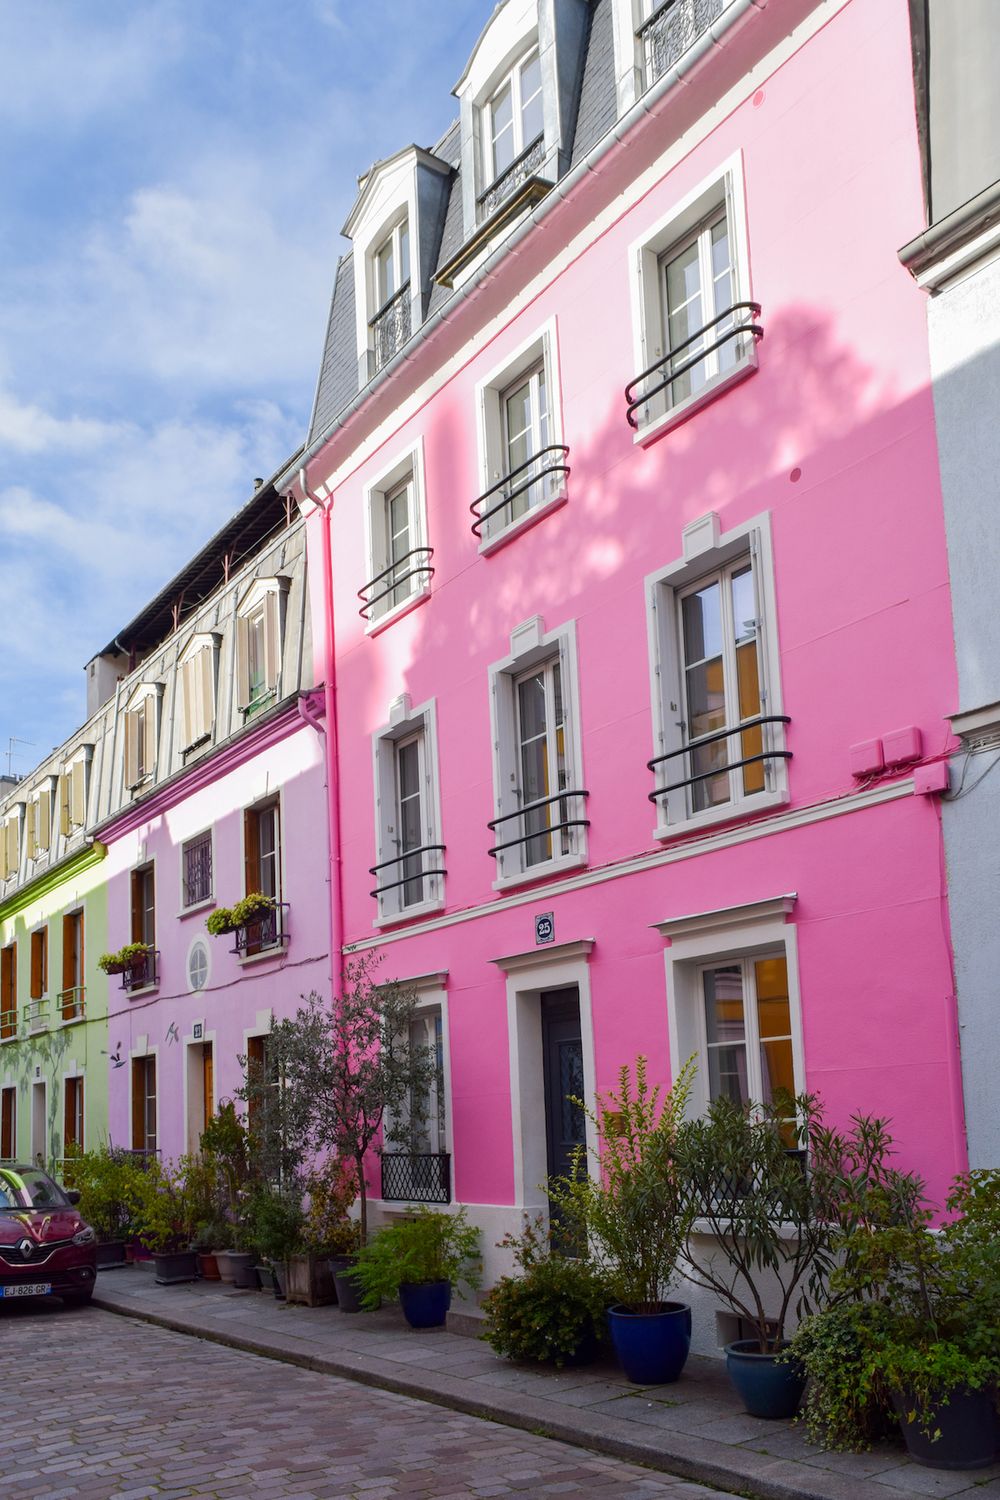 Hot Pink House on Rue Cremieux in Paris